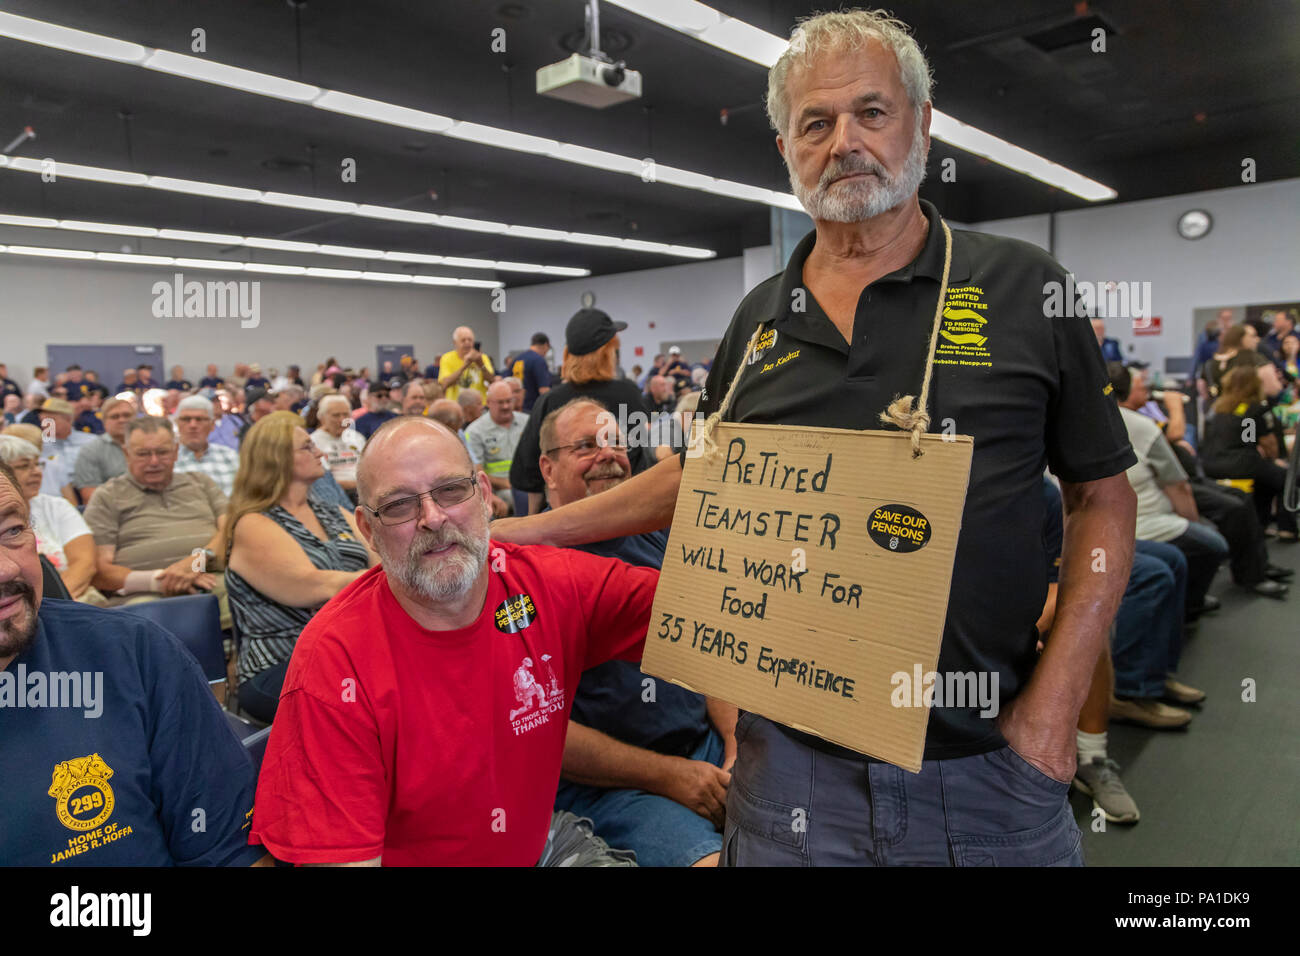 Detroit, Michigan USA - 20 July 2018 - Teamsters and members of other unions rally at a town hall meeting to save their pensions. More than 300 multiemployer pension plans across the country are in financial difficulty. The unions want Congress to pass the Butch Lewis Act to protect pension benefits. Credit: Jim West/Alamy Live News Stock Photo